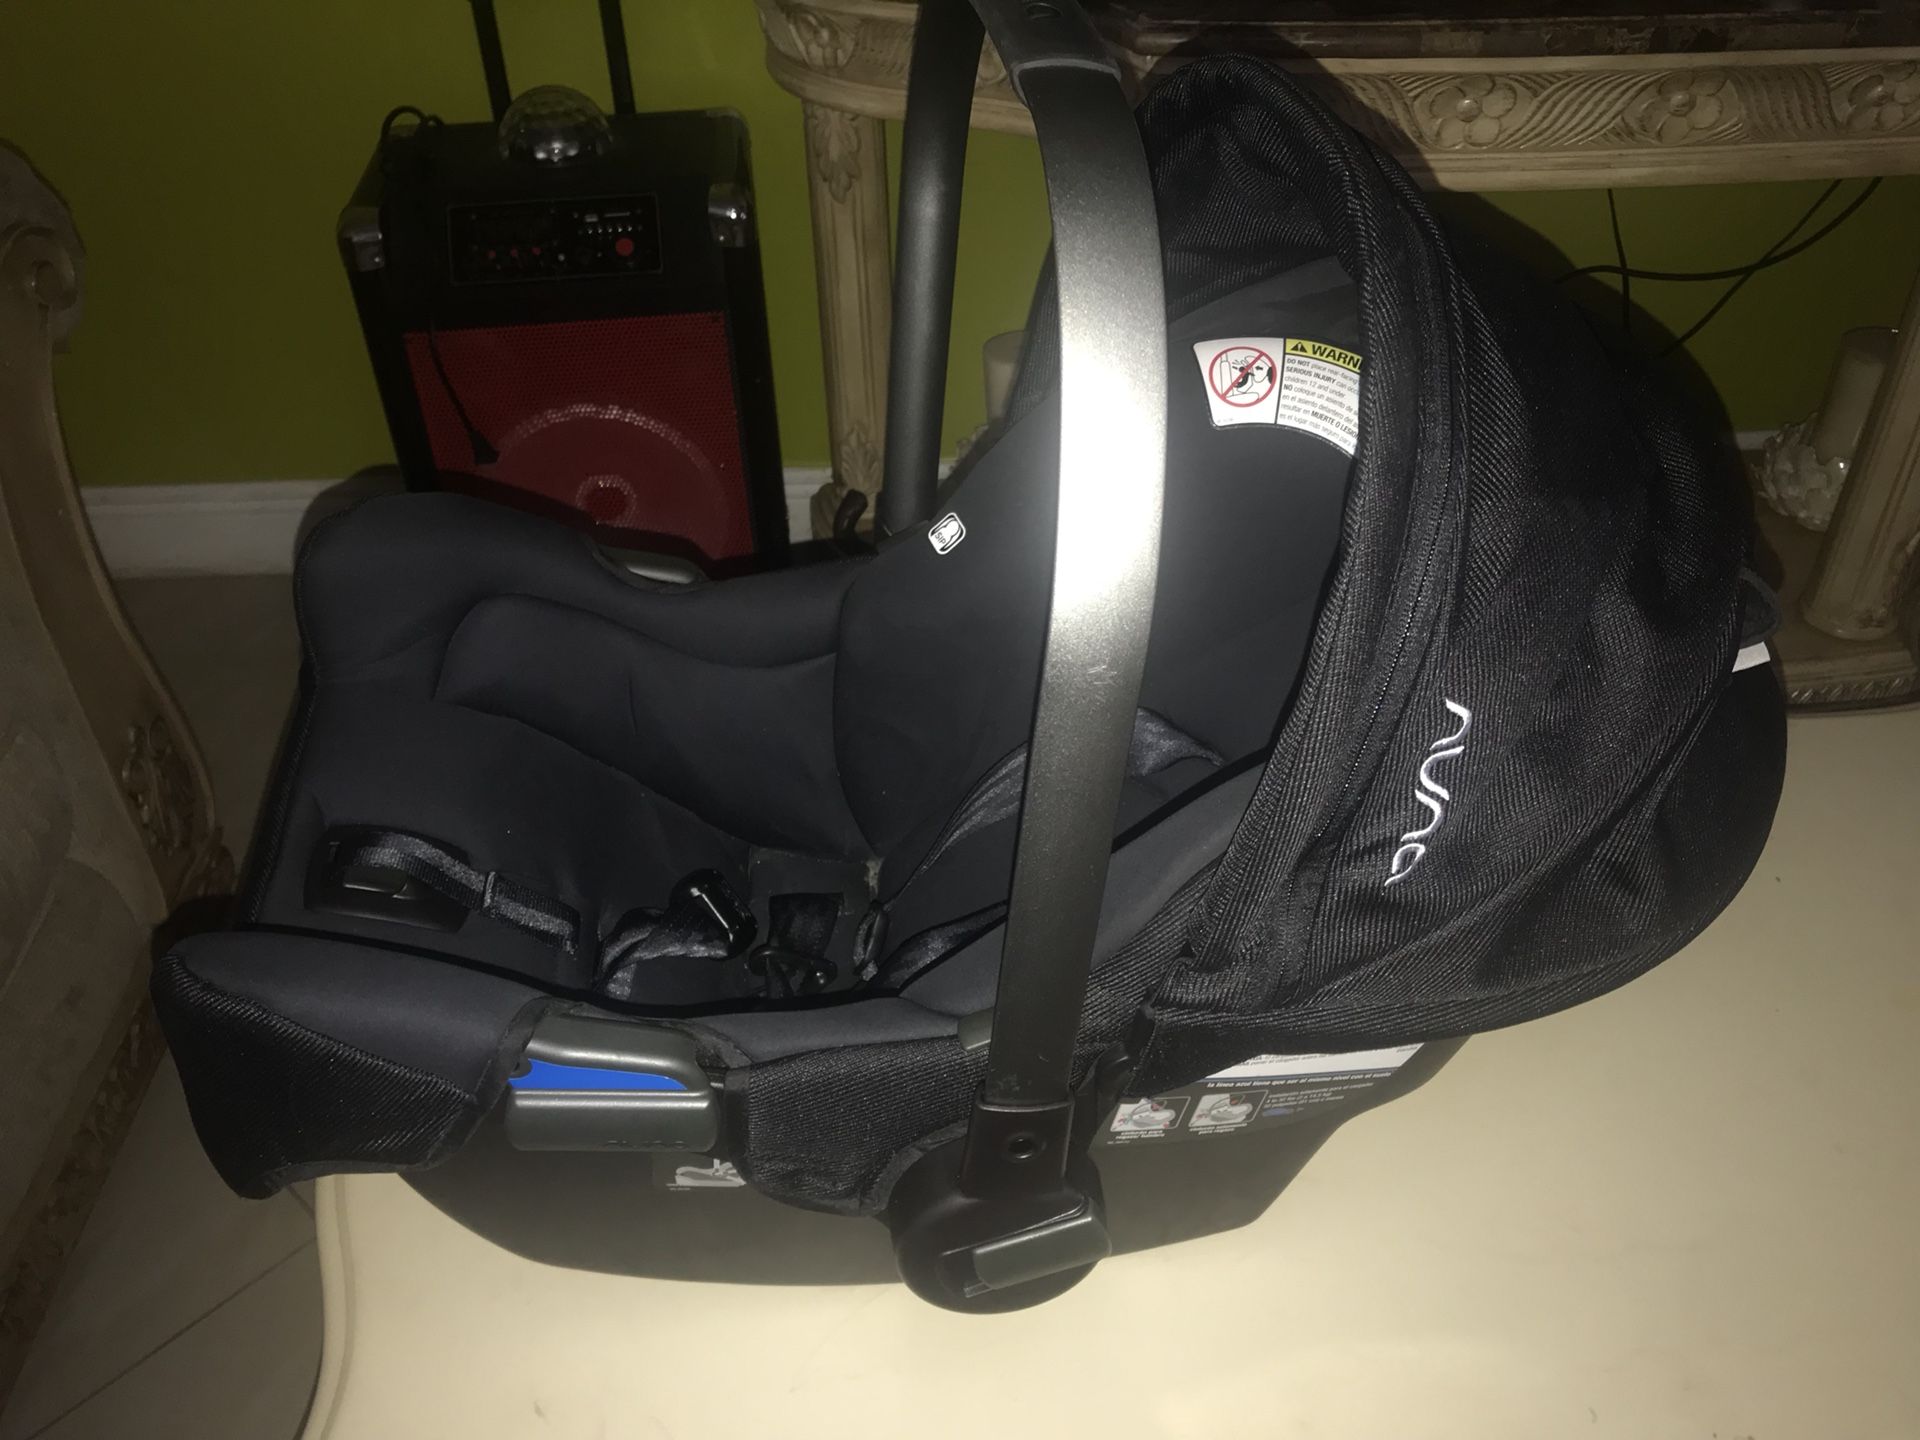 Car Seat! Nuna like new for baby, New technology Need Gone today